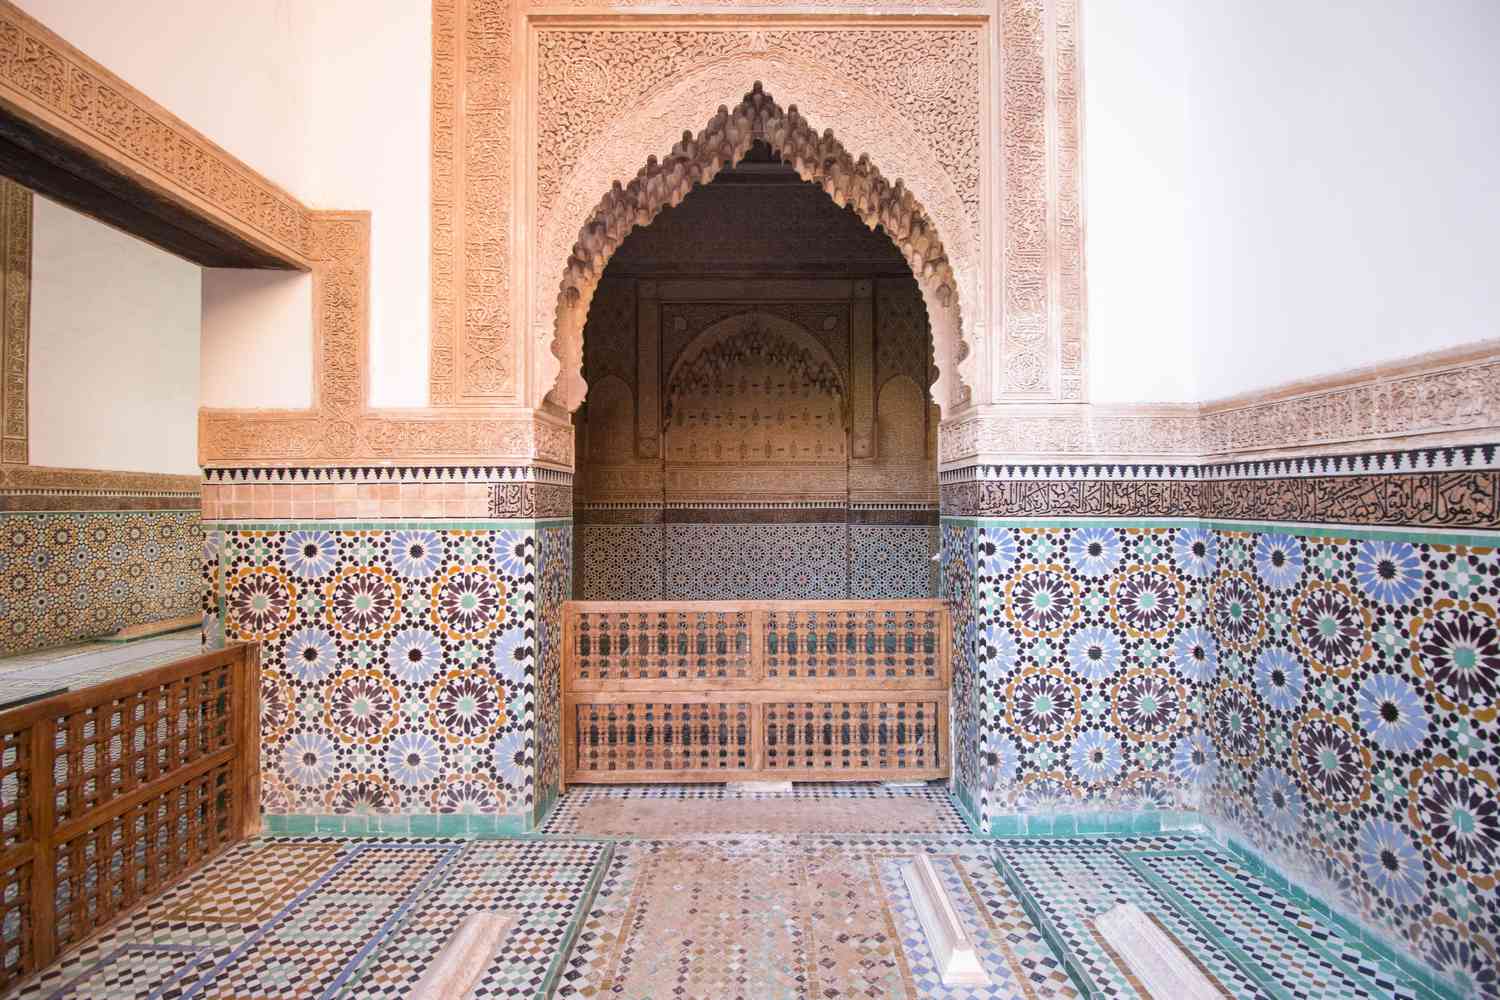 A Traveler’s Guide to Navigating Time in Morocco